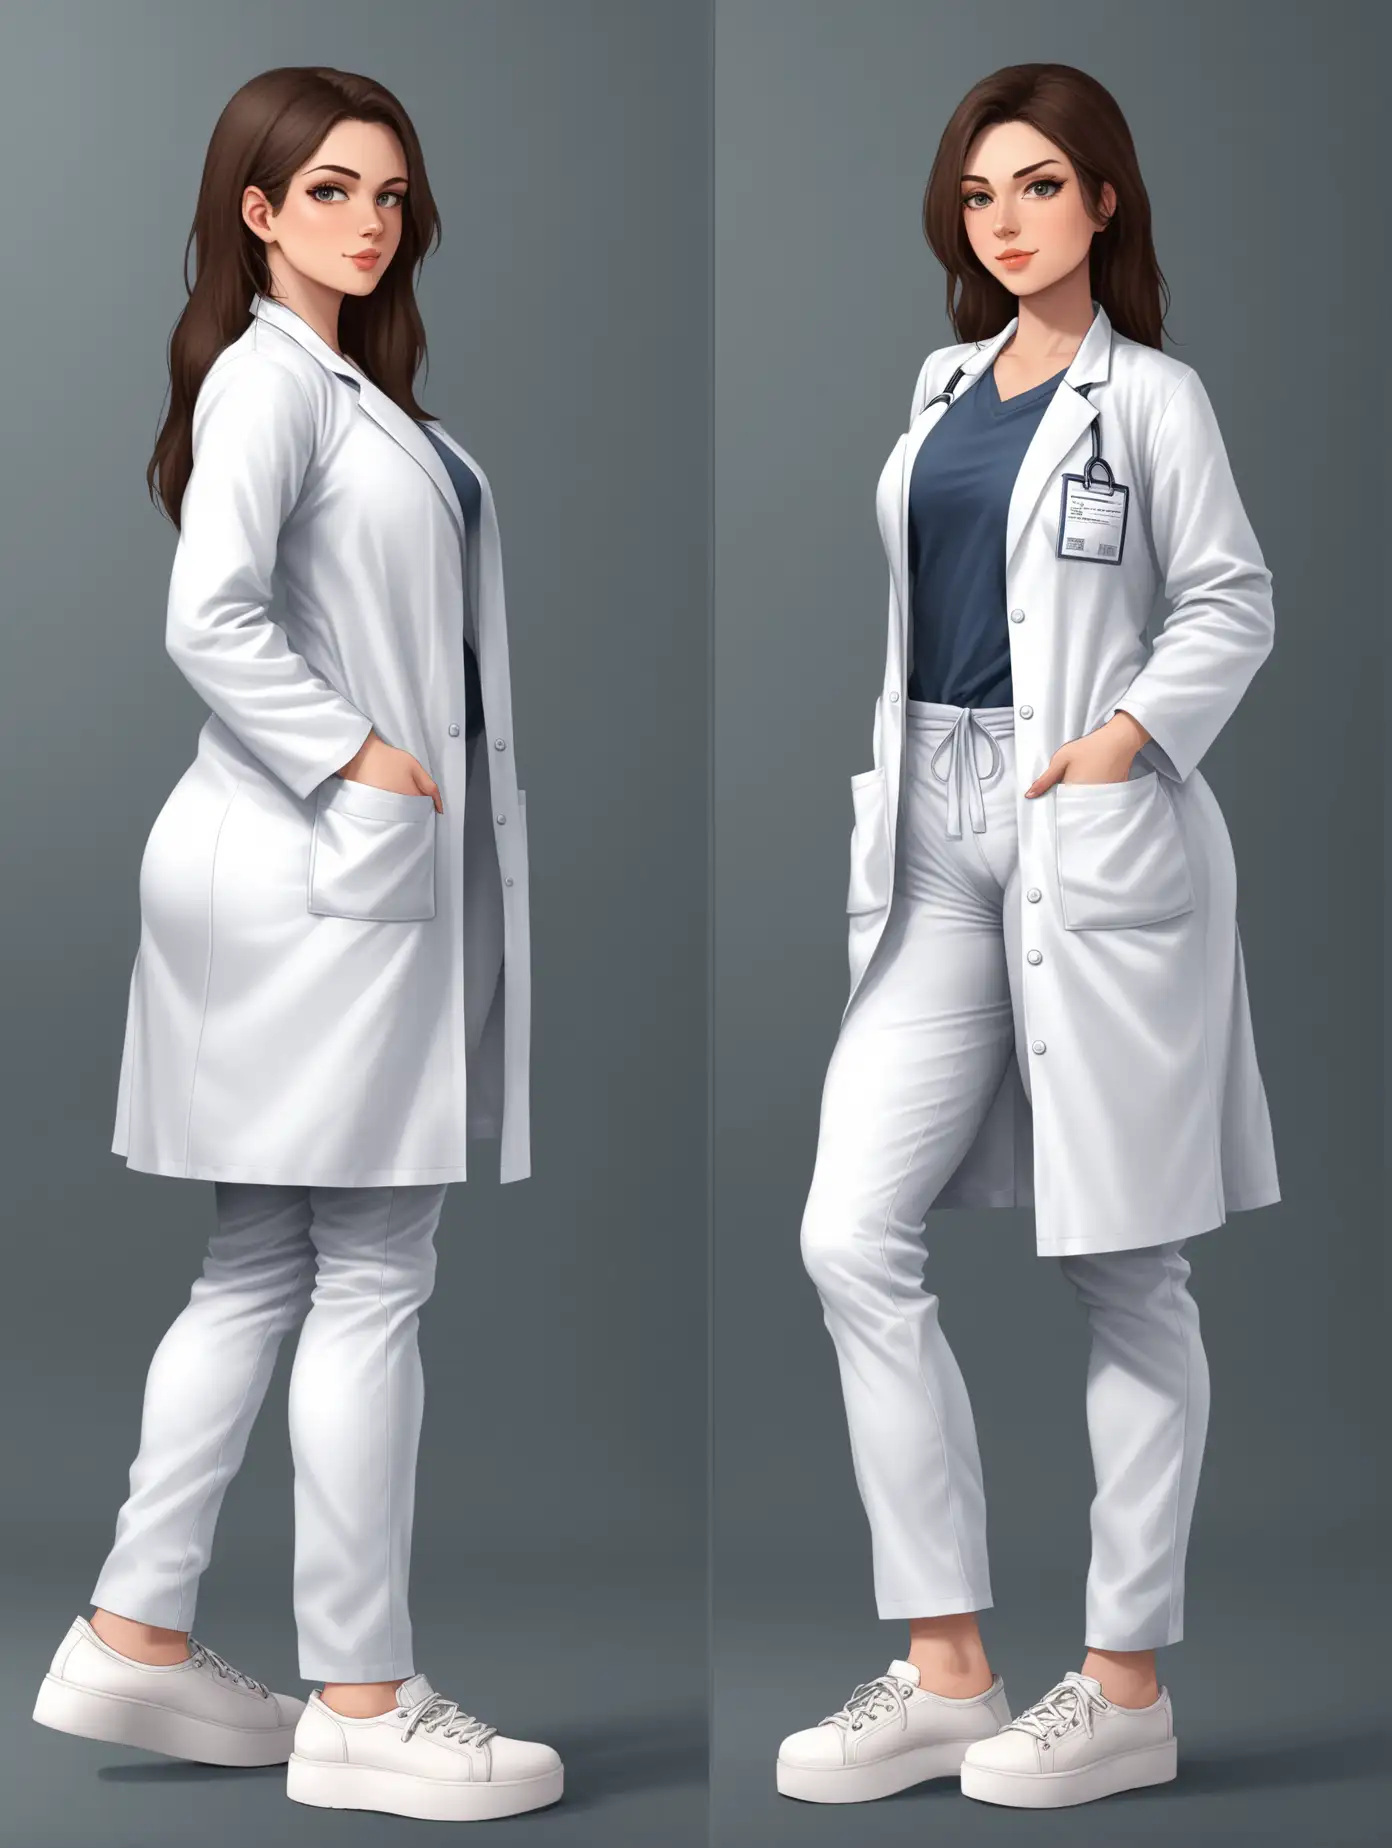 Sensual picture of a hot girl, age 25, lab science doctor outfit, big ass, pretty face, feet size small, wearing lab coat, pants, wearing Sonoma label white platform sneakers, 2 poses